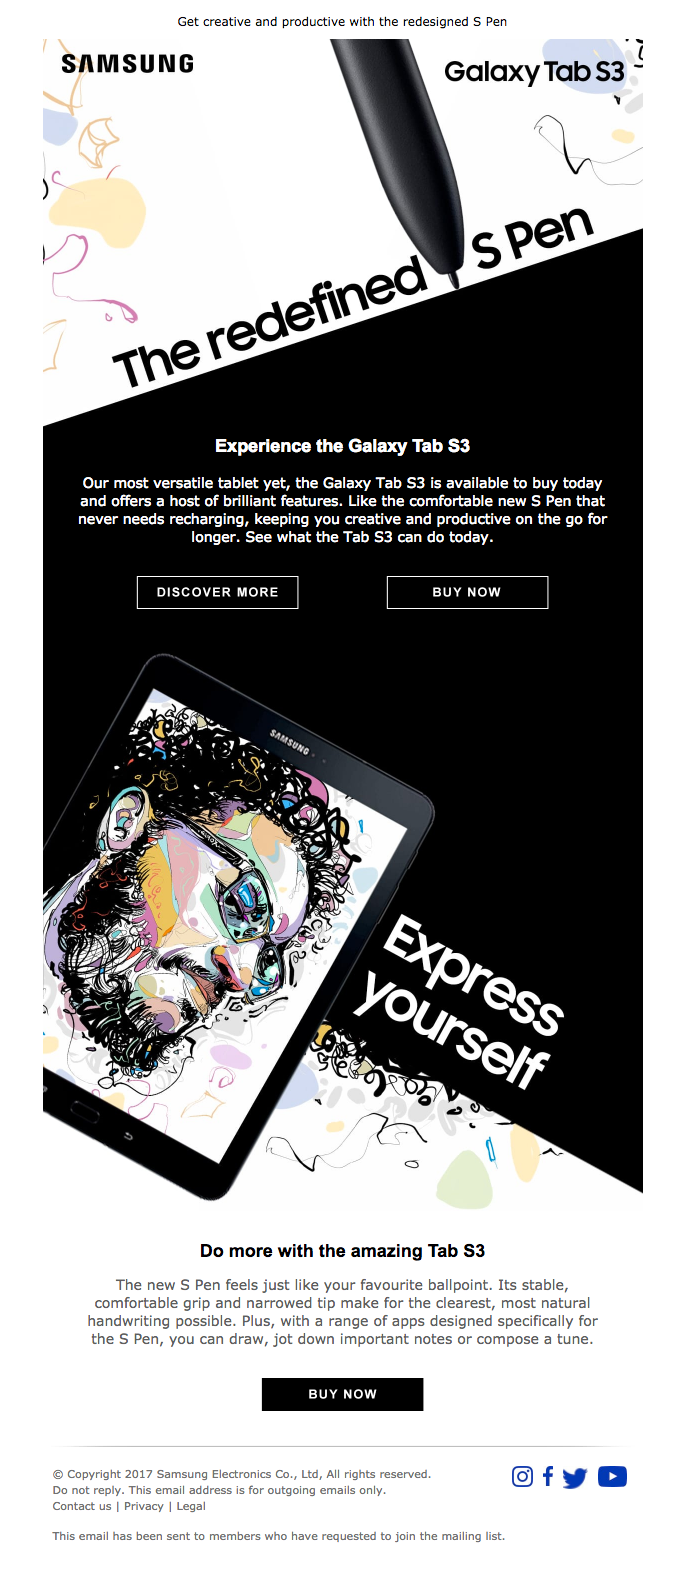 Express yourself with the Galaxy Tab S and S Pen - Samsung Email Newsletter